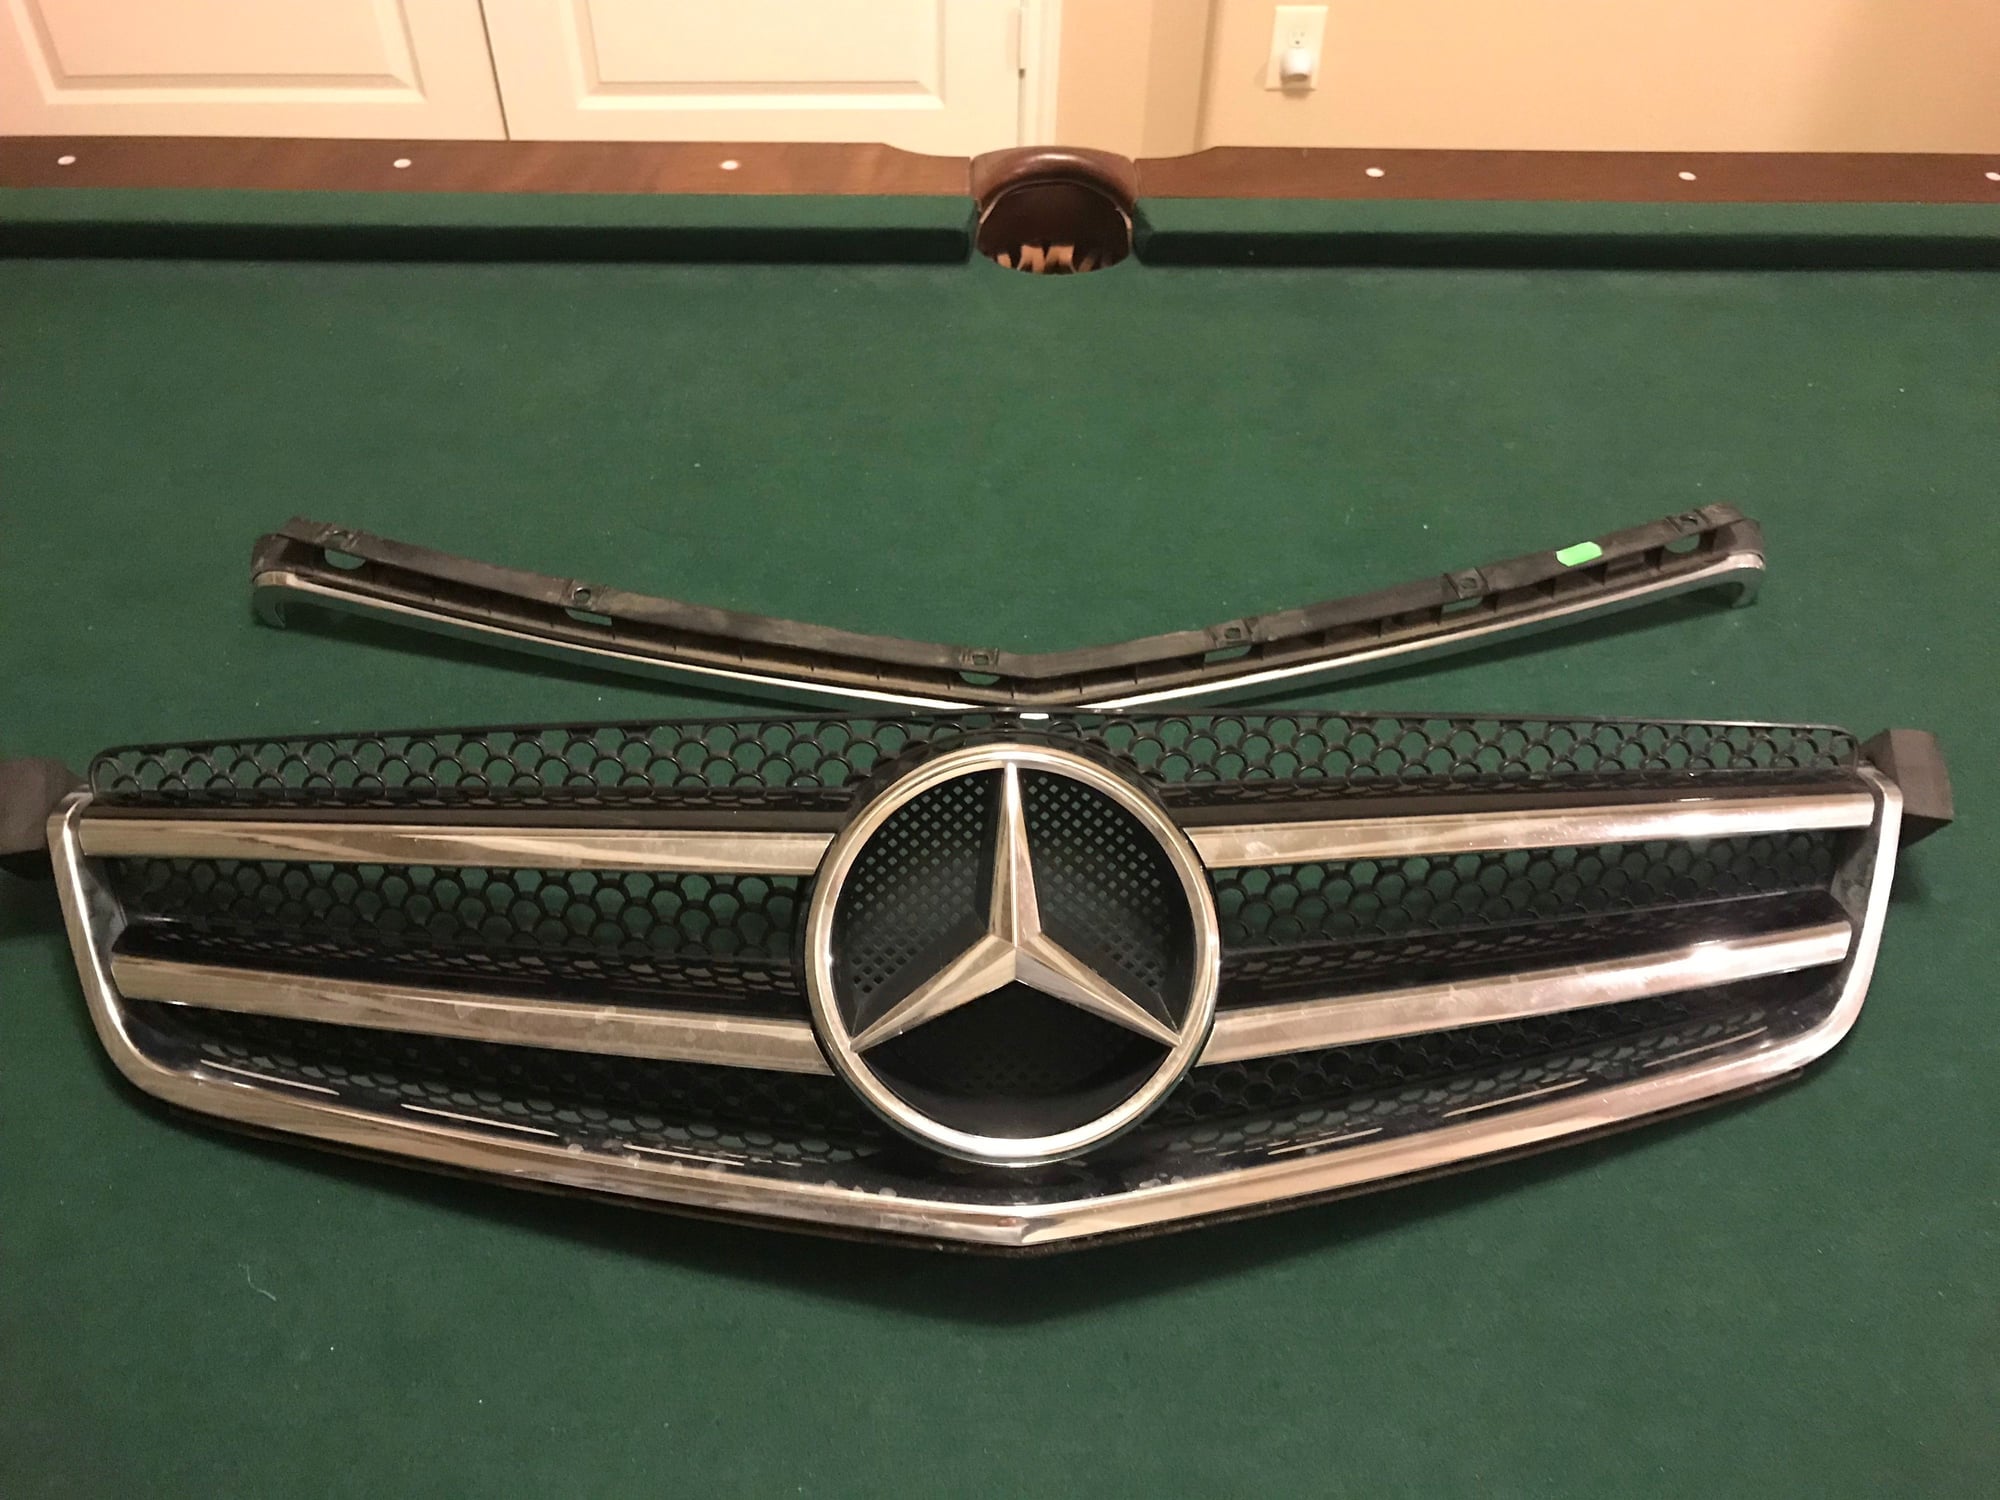 Exterior Body Parts - Mercedes 2008-2011 C-Class C63 Grille - W204 OEM - Used - 2008 to 2011 Mercedes-Benz C63 AMG - Houston, TX 77002, United States